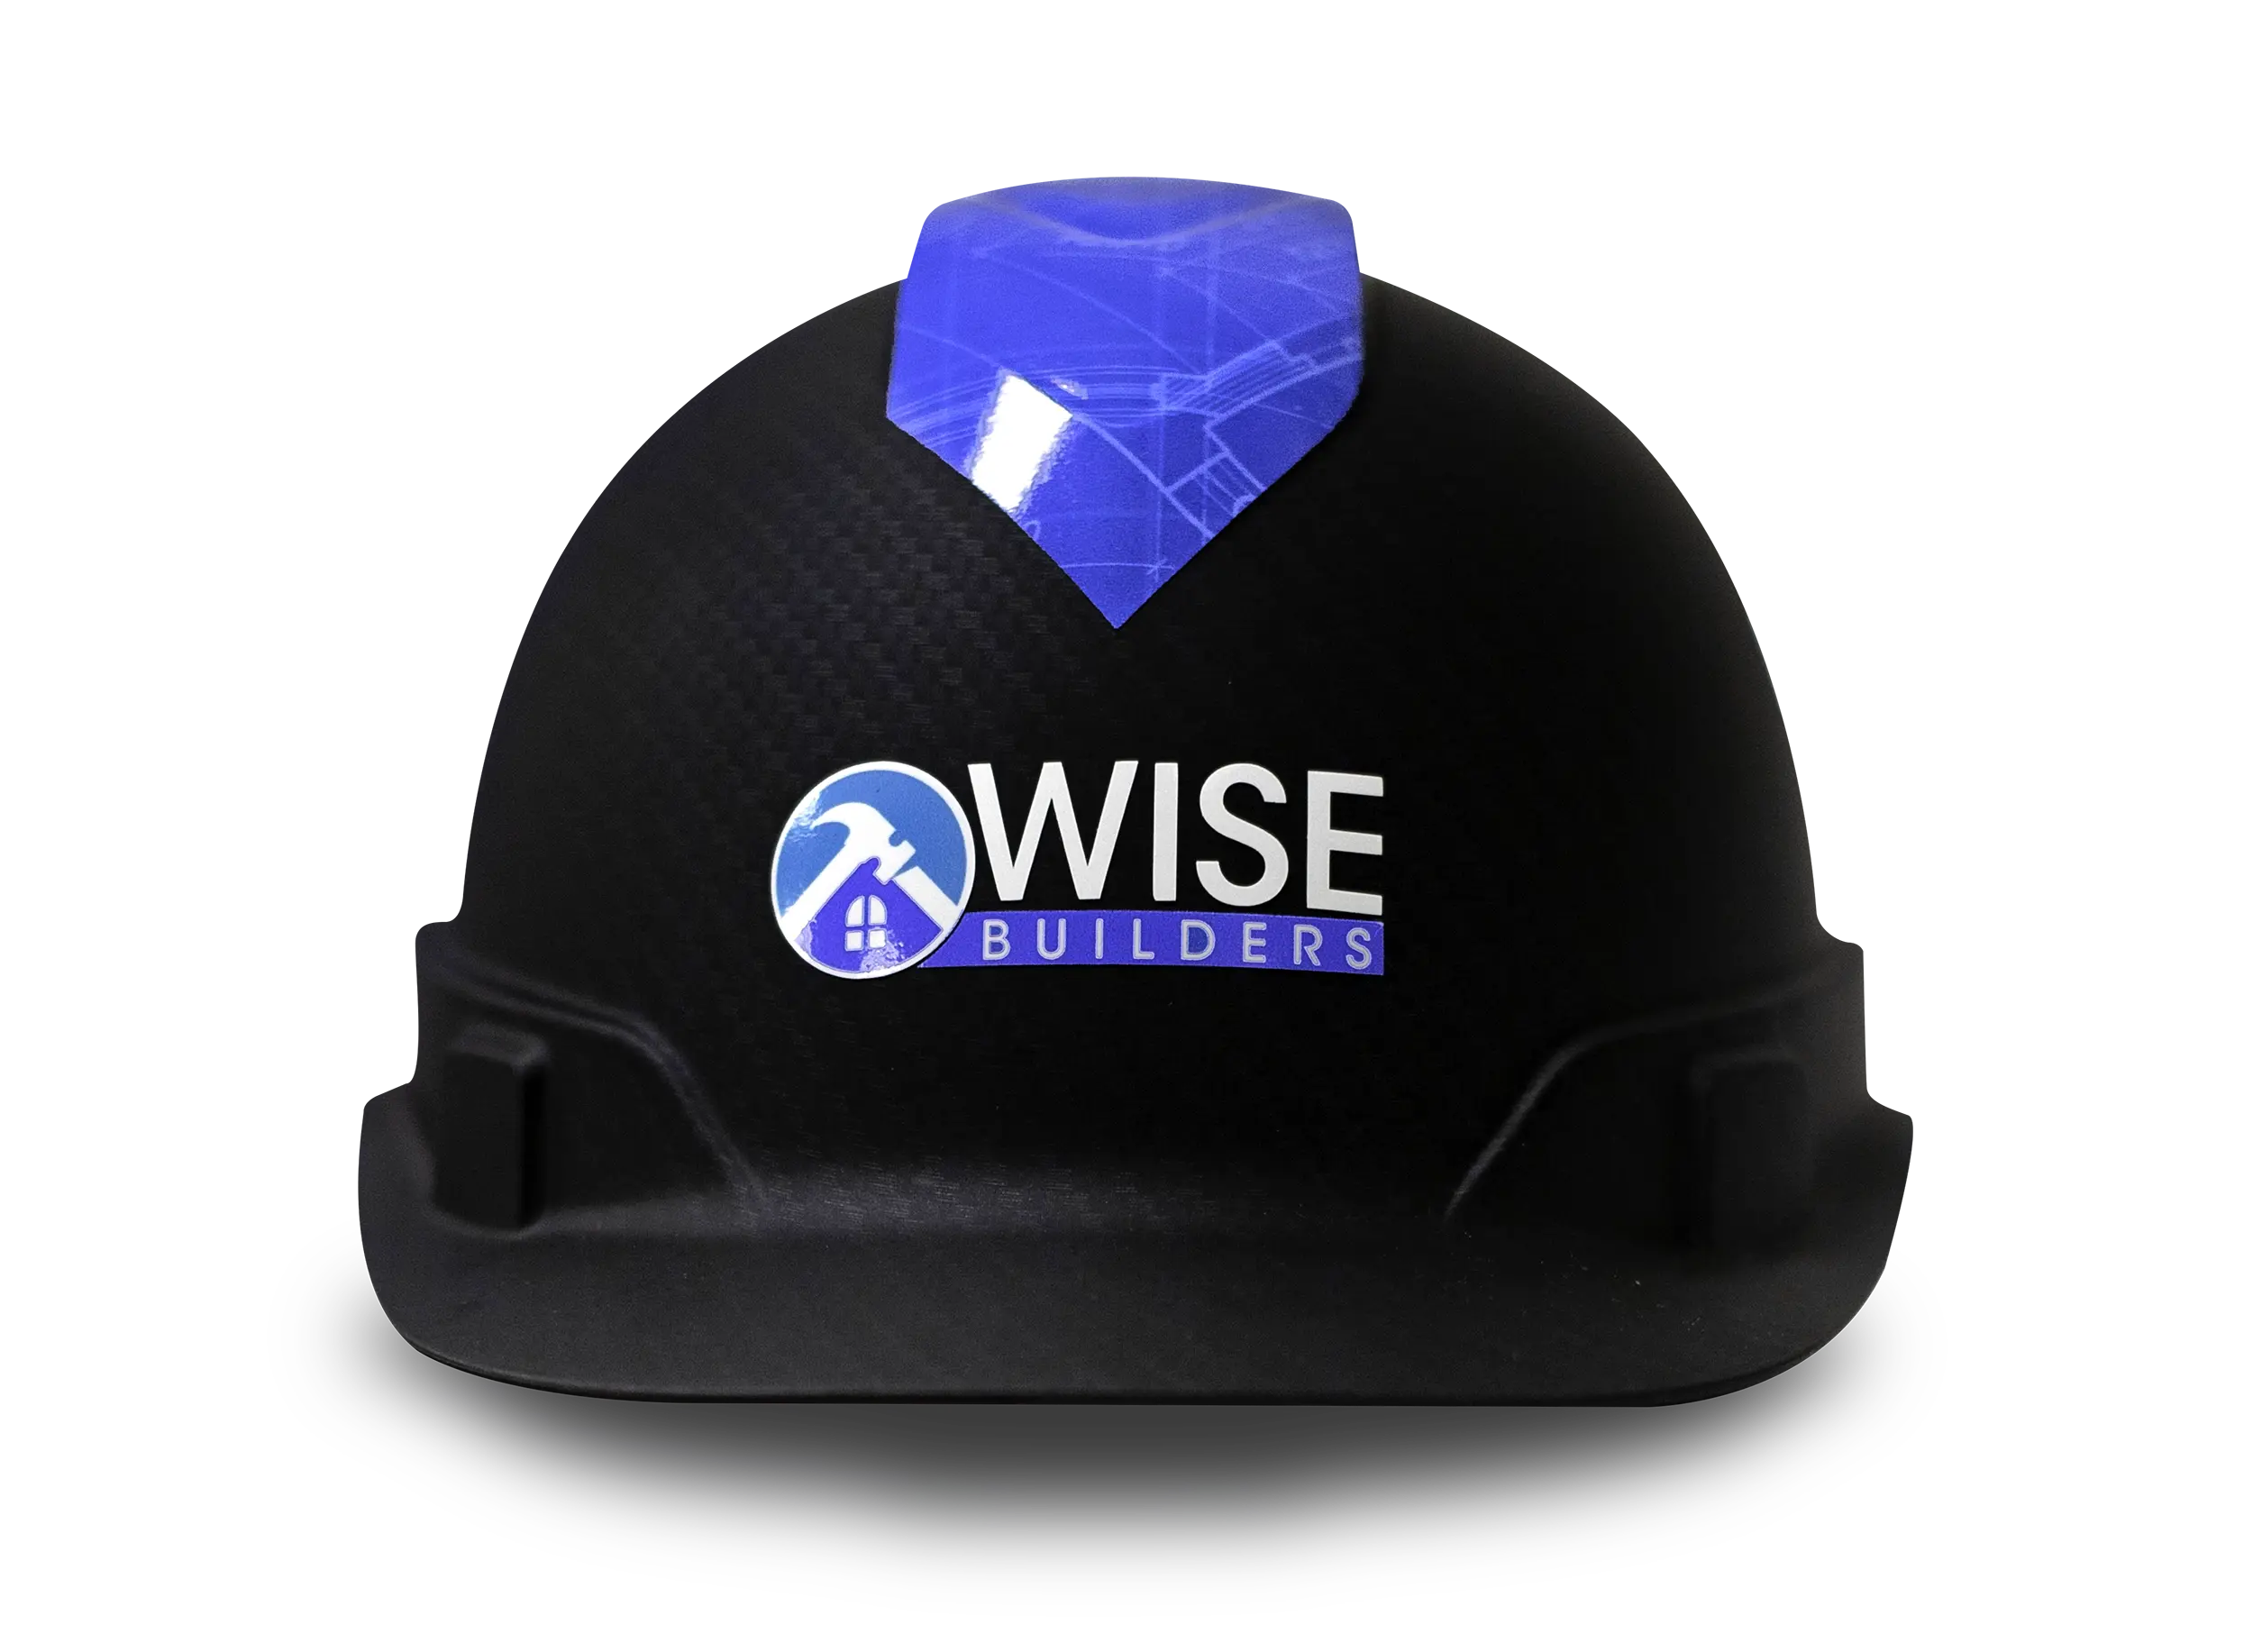 Wise Builders logo and branded hard hat, which is the construction hat